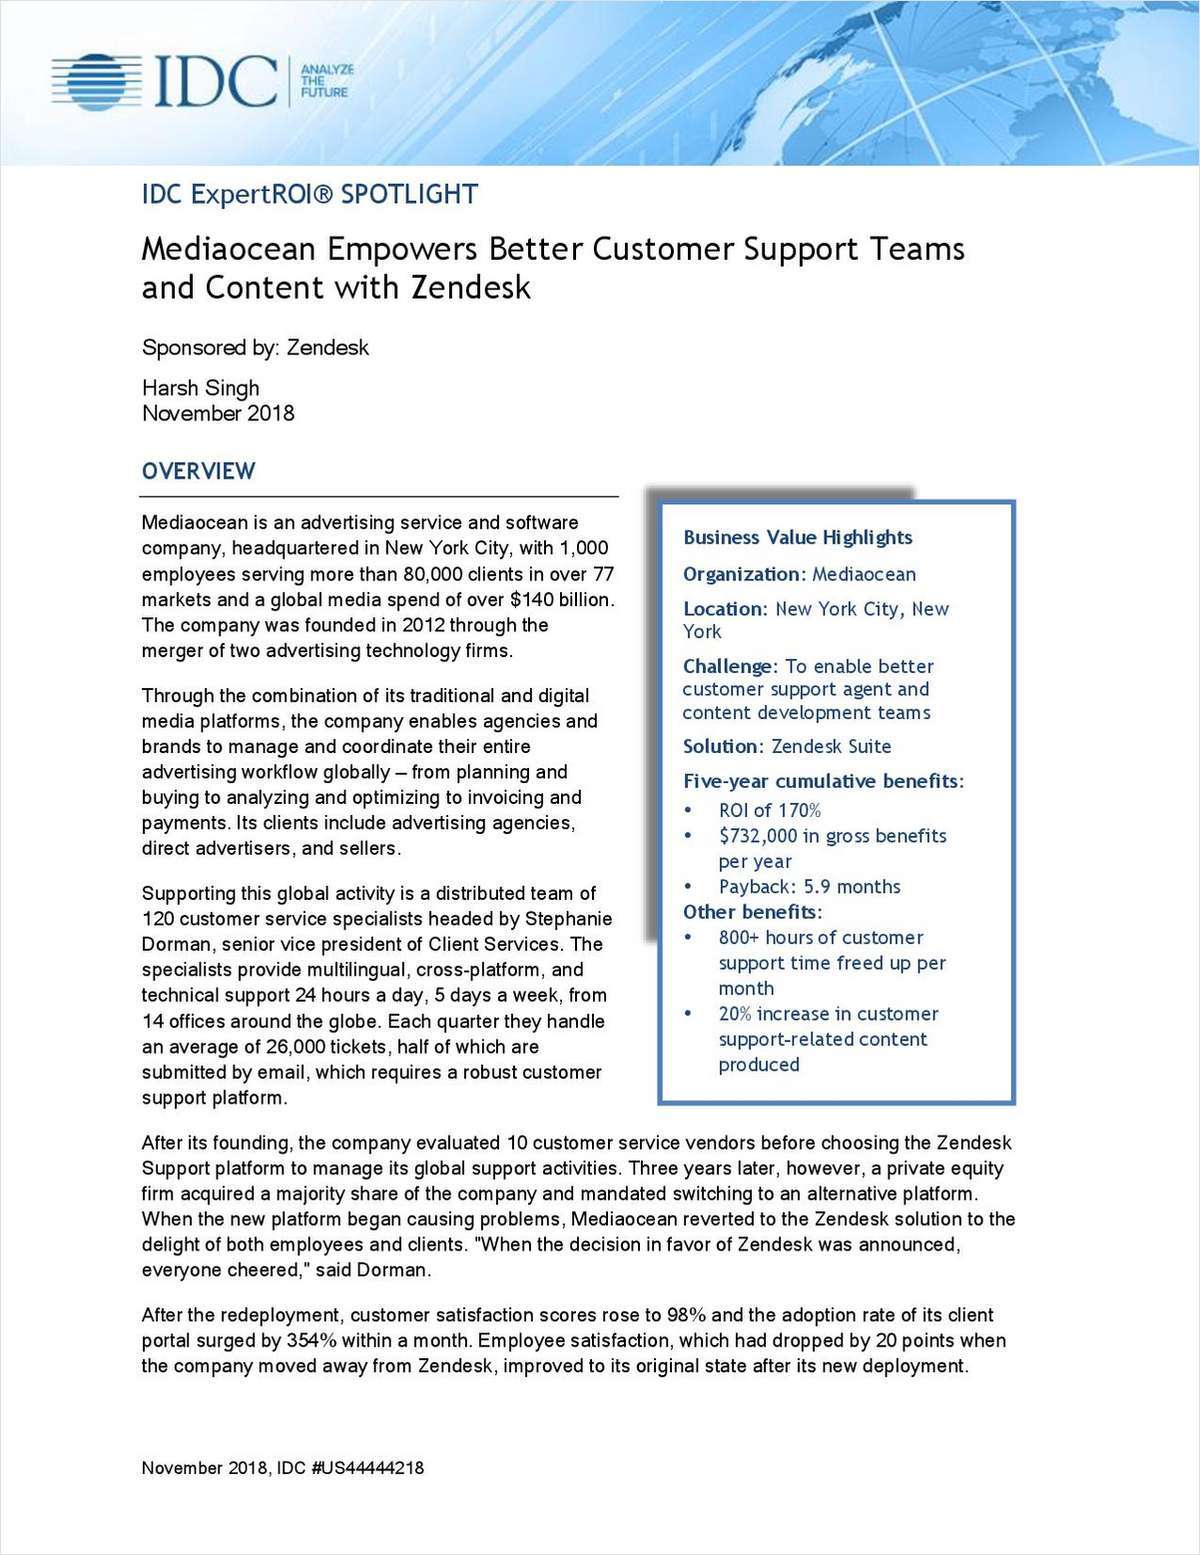 IDC ExpertROI Spotlight: Mediaocean Empowers Better Customer Support Teams and Content with Zendesk